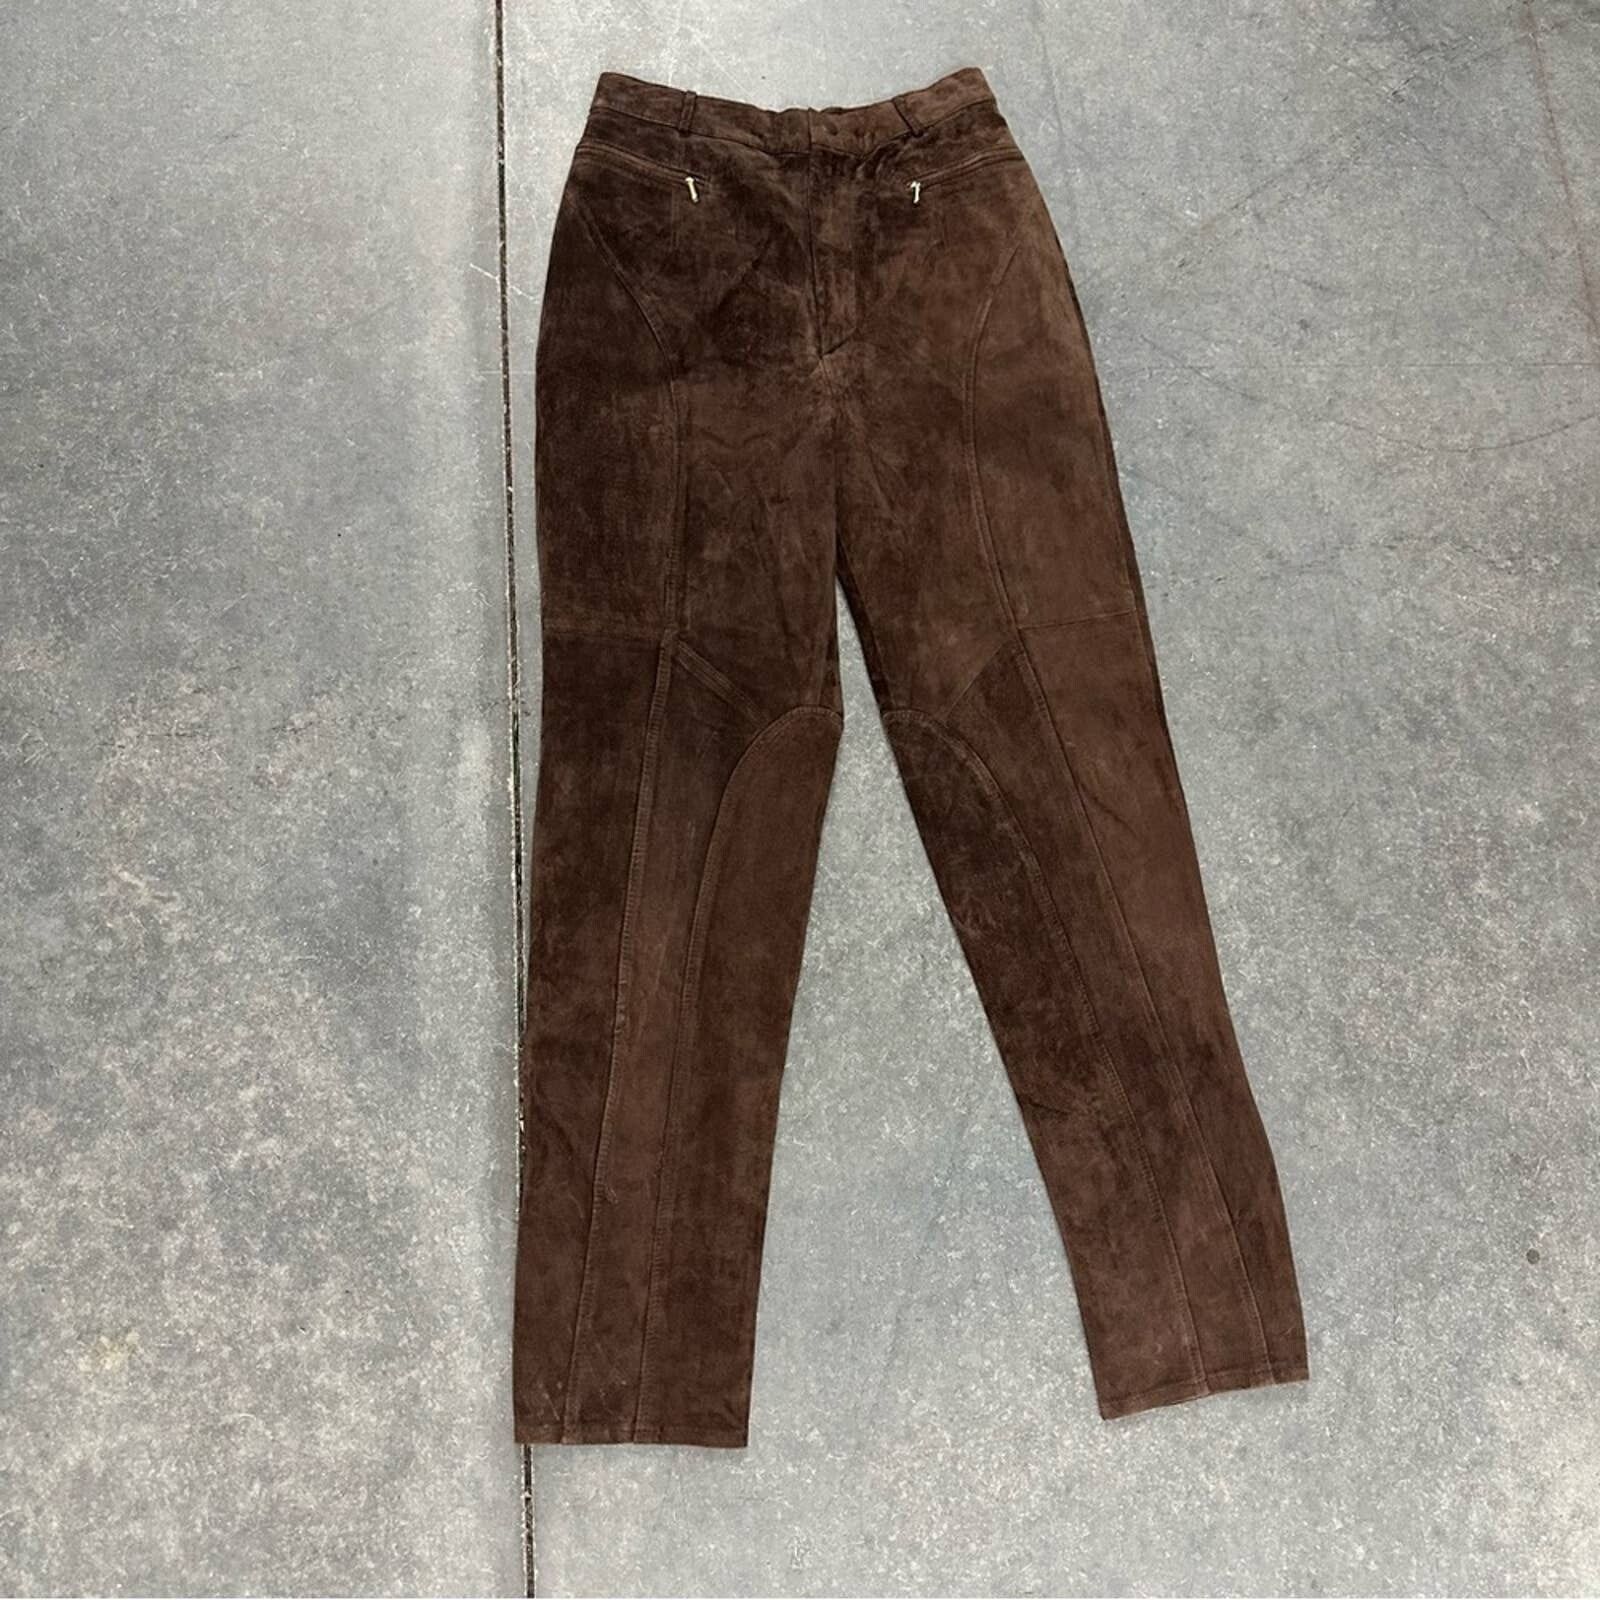 Vintage Vintage 80s 90s brown suede leather tapered pants 10 Size 32" / US 10 / IT 46 - 1 Preview